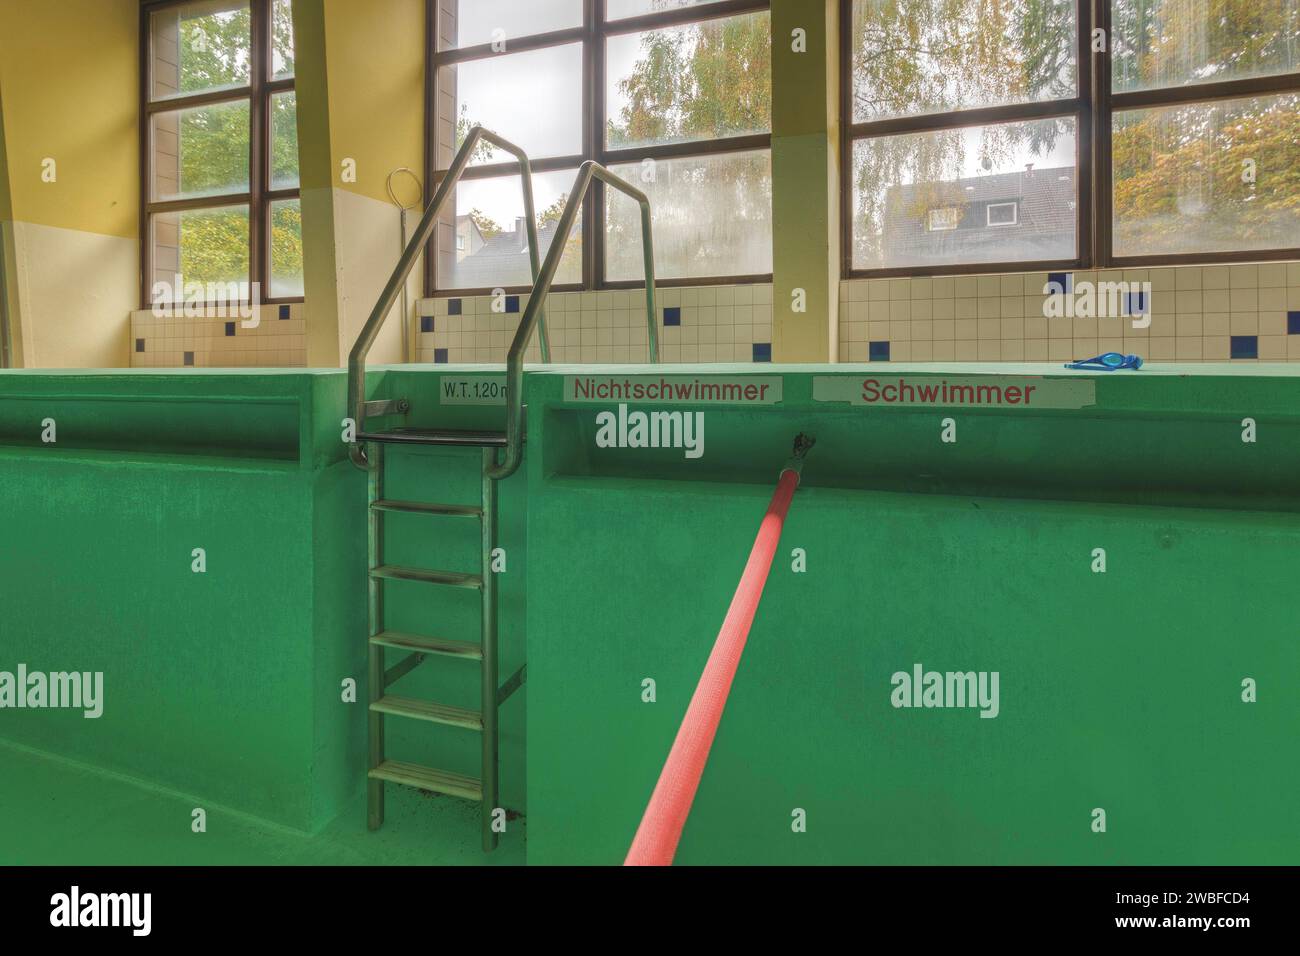 Abandoned swimming pool with signs for non-swimmers and swimmers' areas, Bad am Park, Lost Place, Essen, North Rhine-Westphalia, Germany Stock Photo